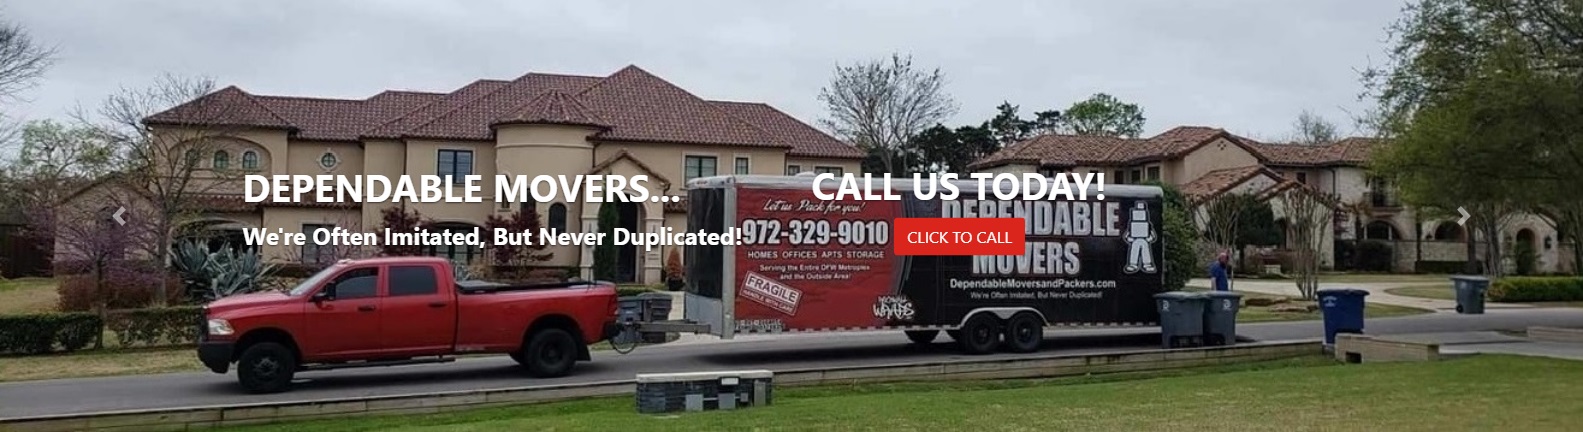 Dependable Movers Arlington Mover Arlington Moving Company - Home Office Apartment Movers Residential Commercial Movers in Arlington Texas